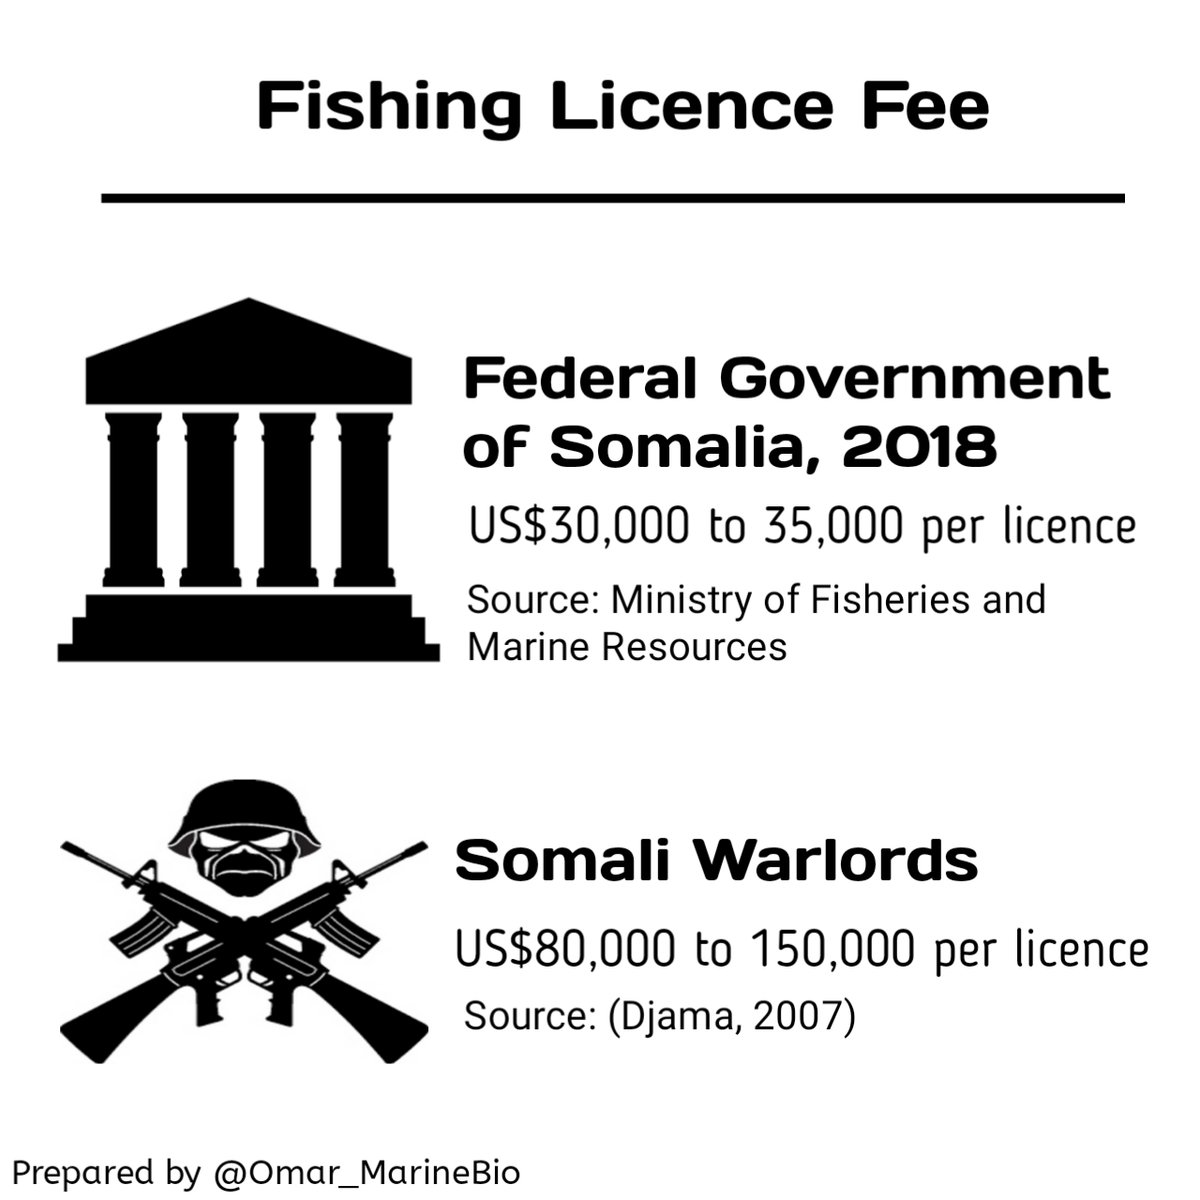 You know what's worse than their bad decision?Finding out that warlords used to generate more revenue from fishing licenses. They knew better they were selling their resources.Licensing commercial fishing will be forever a shameful chapter in the current administration. /3